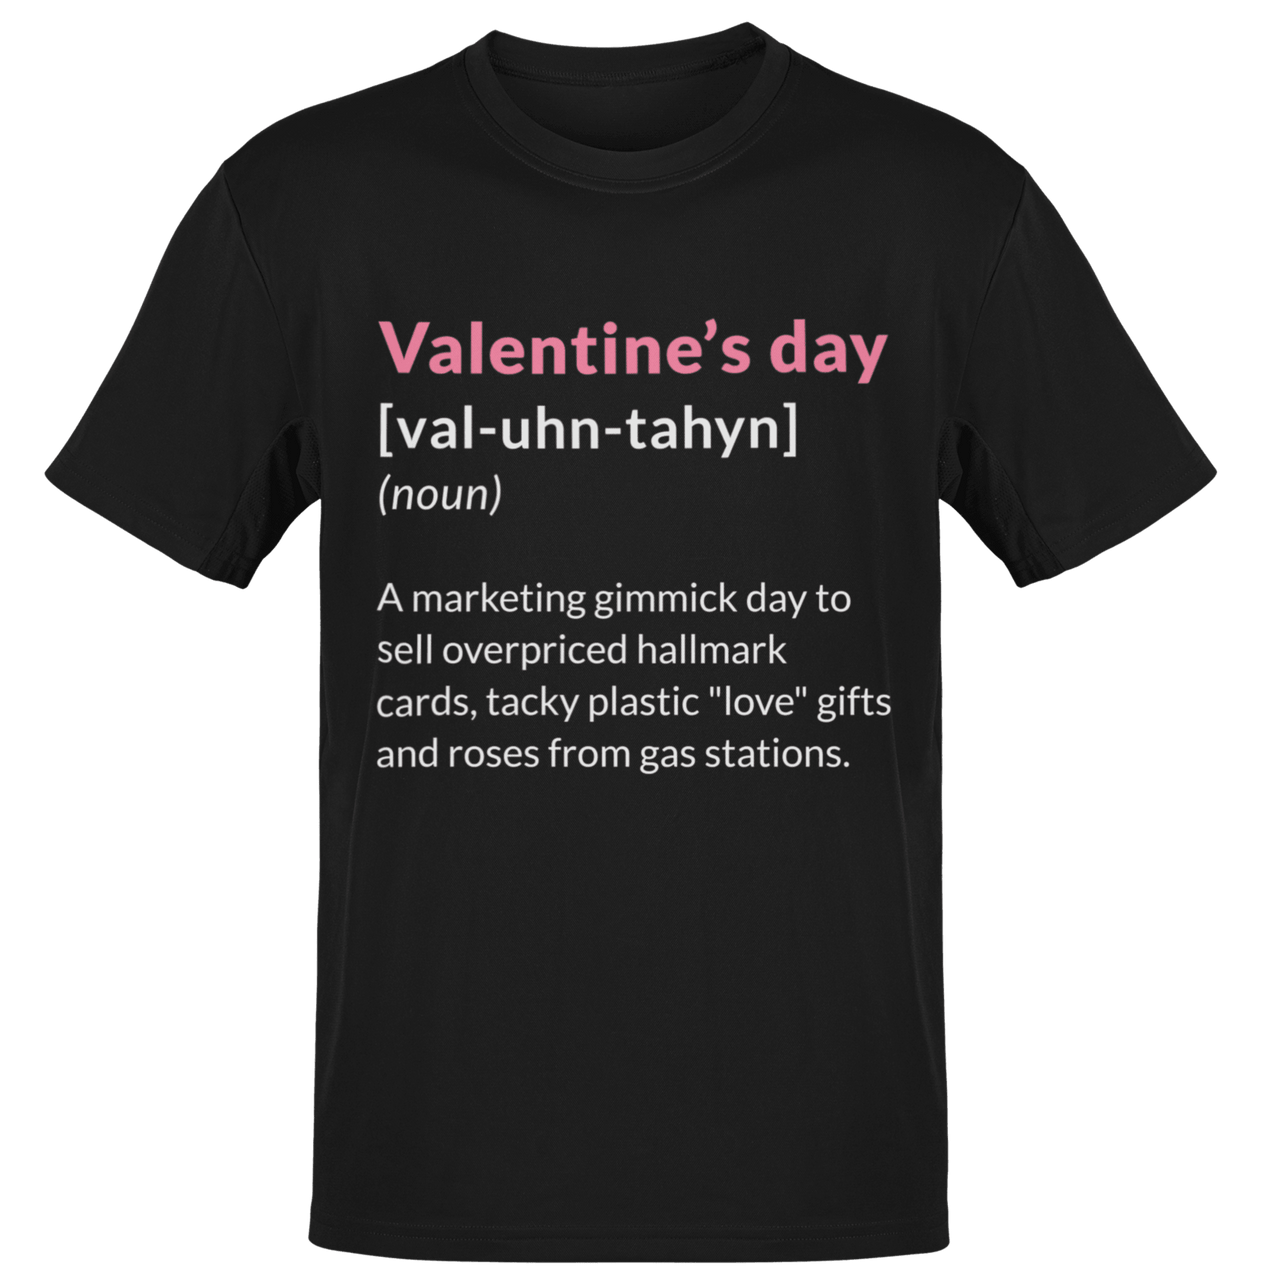 Valentine's Day Definition Marketing Gimmick Adult Unisex T-Shirt For Men And Women 8Ball